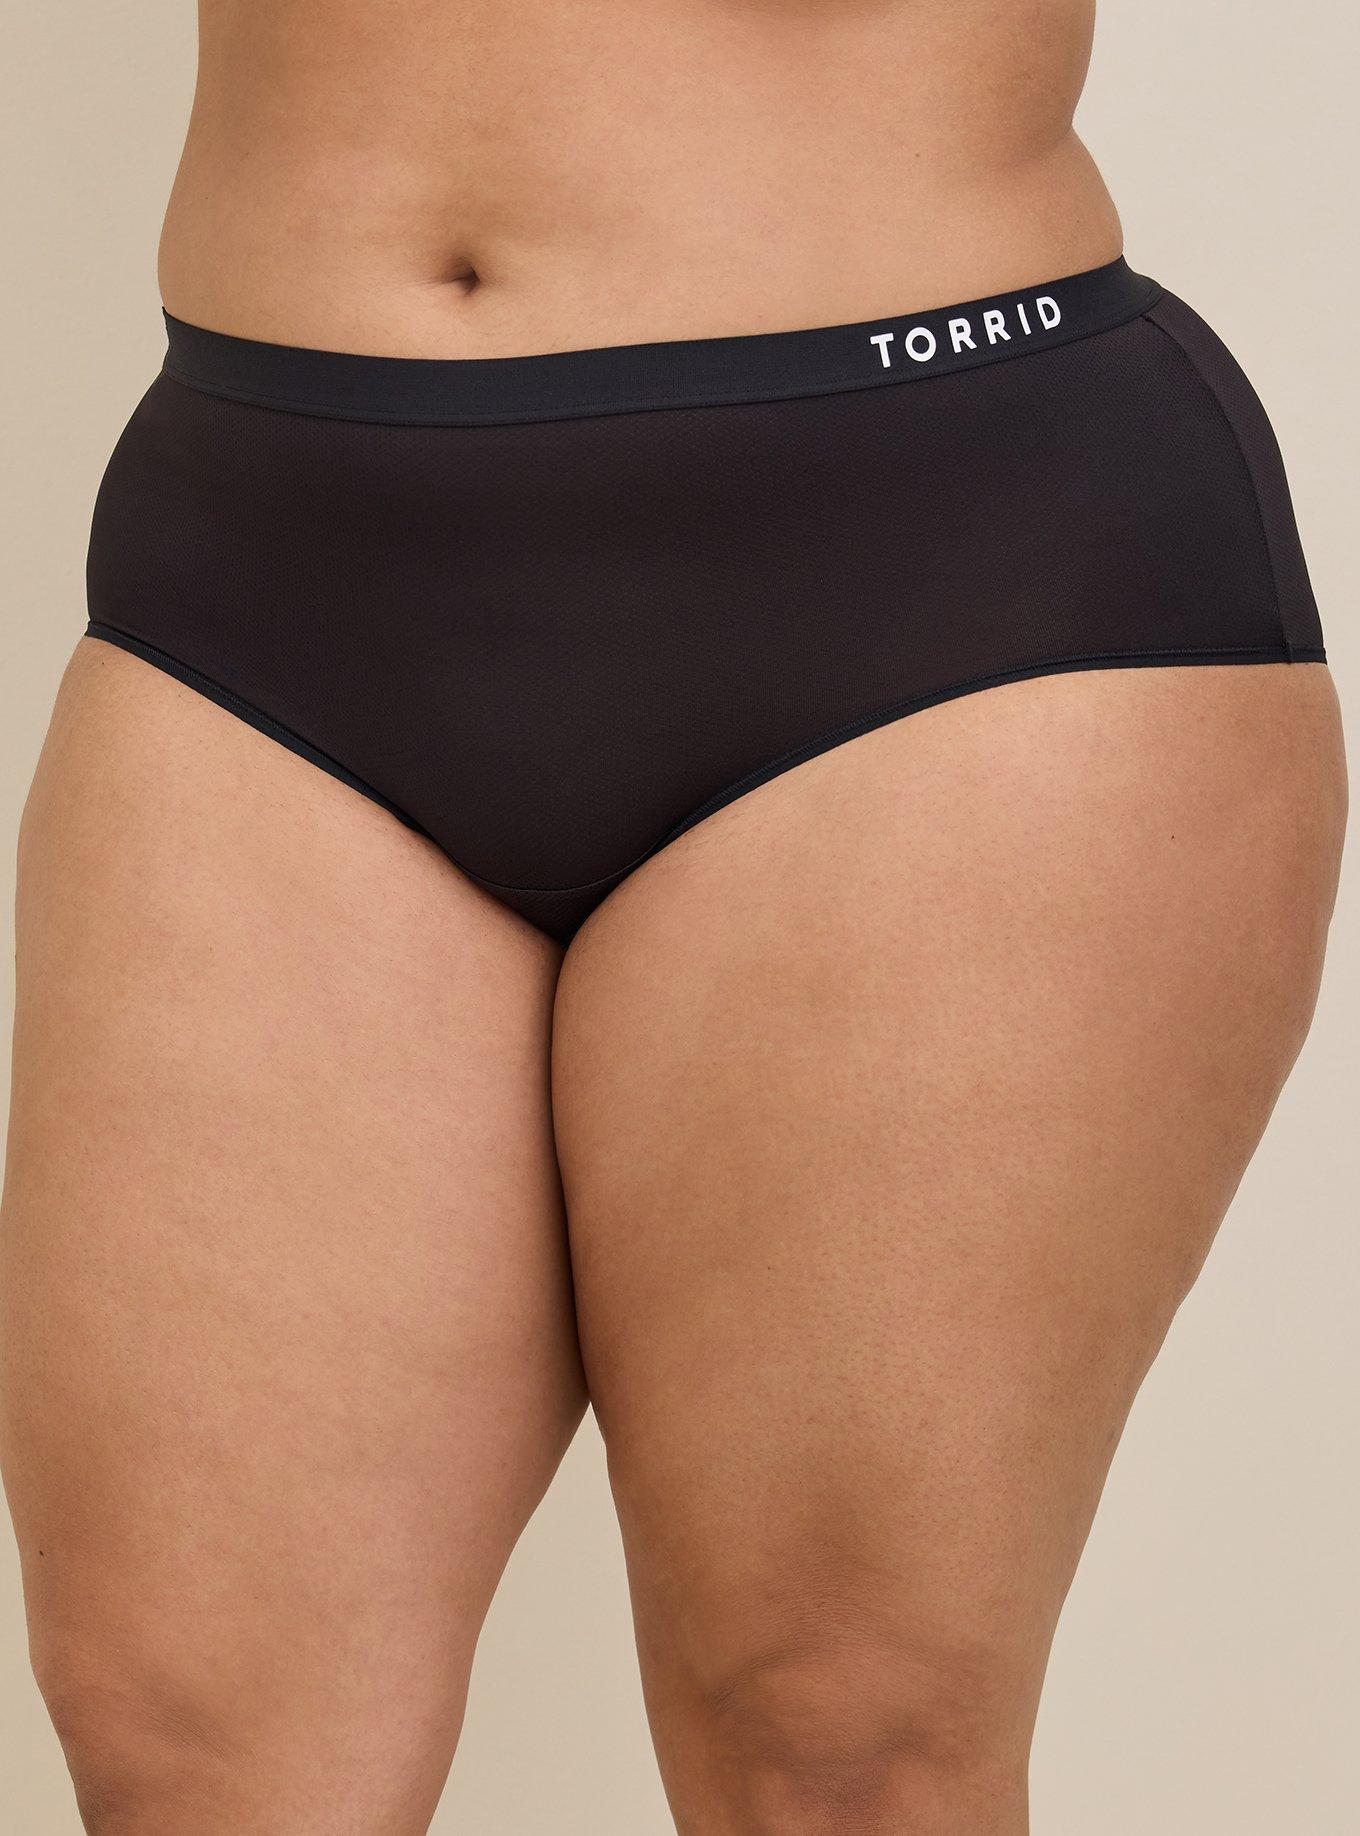 Torrid Cheeky Panties Underwear Curve Iced Coffee Chill Out Plus